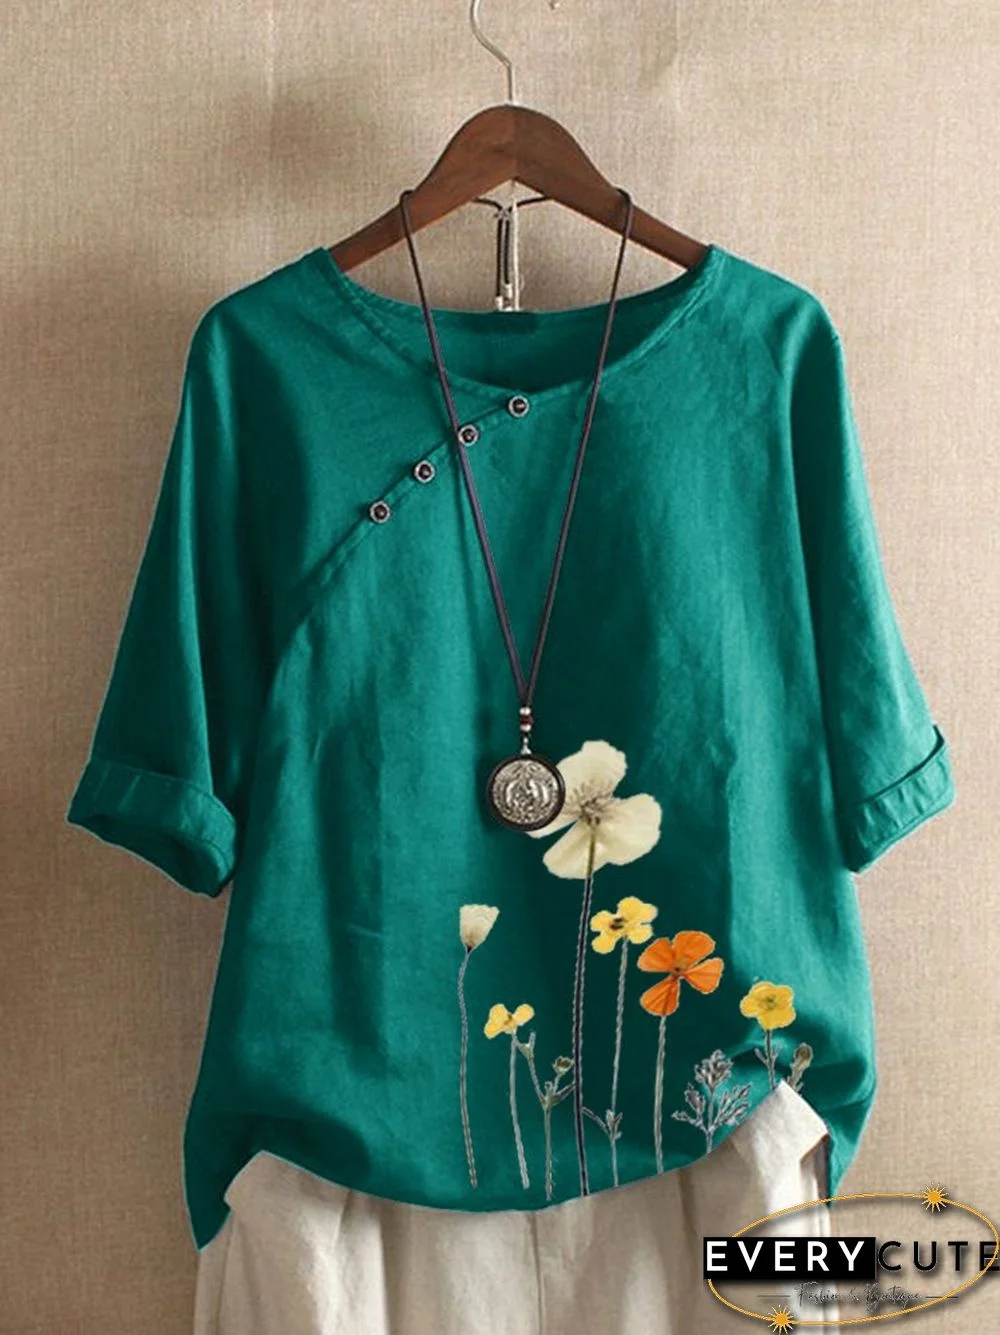 Floral 3/4 Sleeve Casual Round Neck Tops